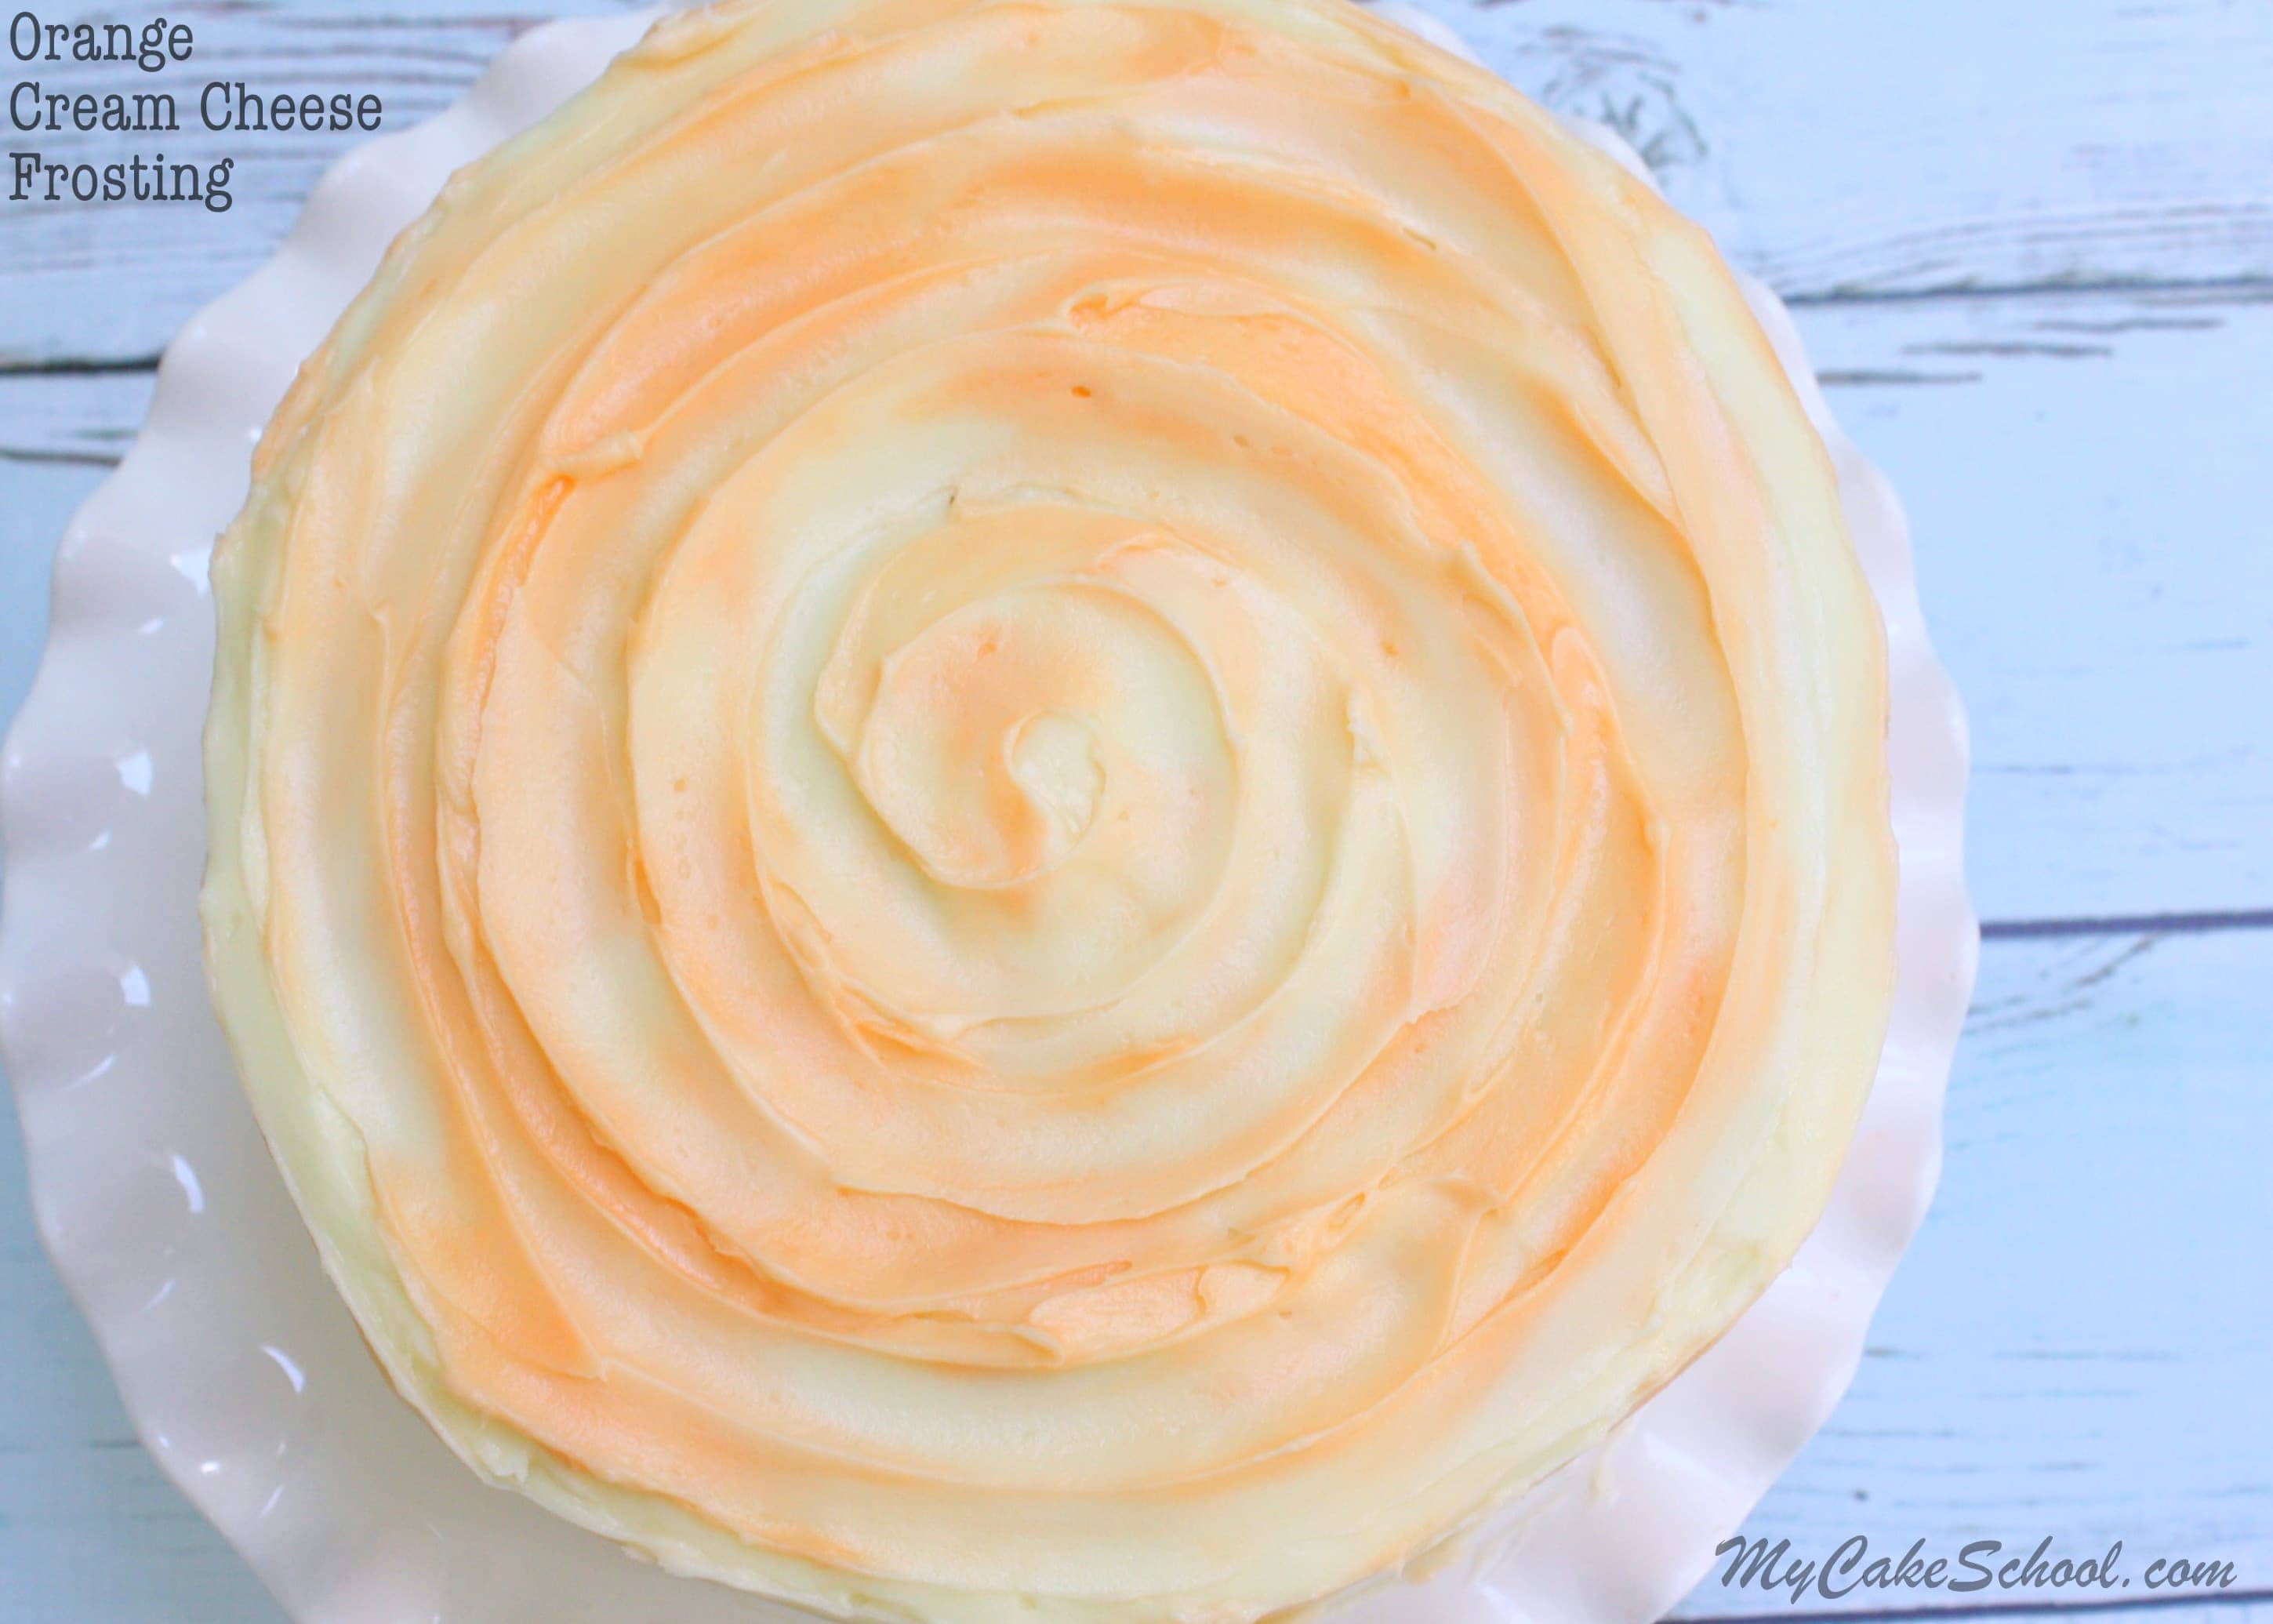 Easy and Delicious Orange Cream Cheese Frosting Recipe! We love this flavorful frosting with citrus cakes, spice cakes, and more!